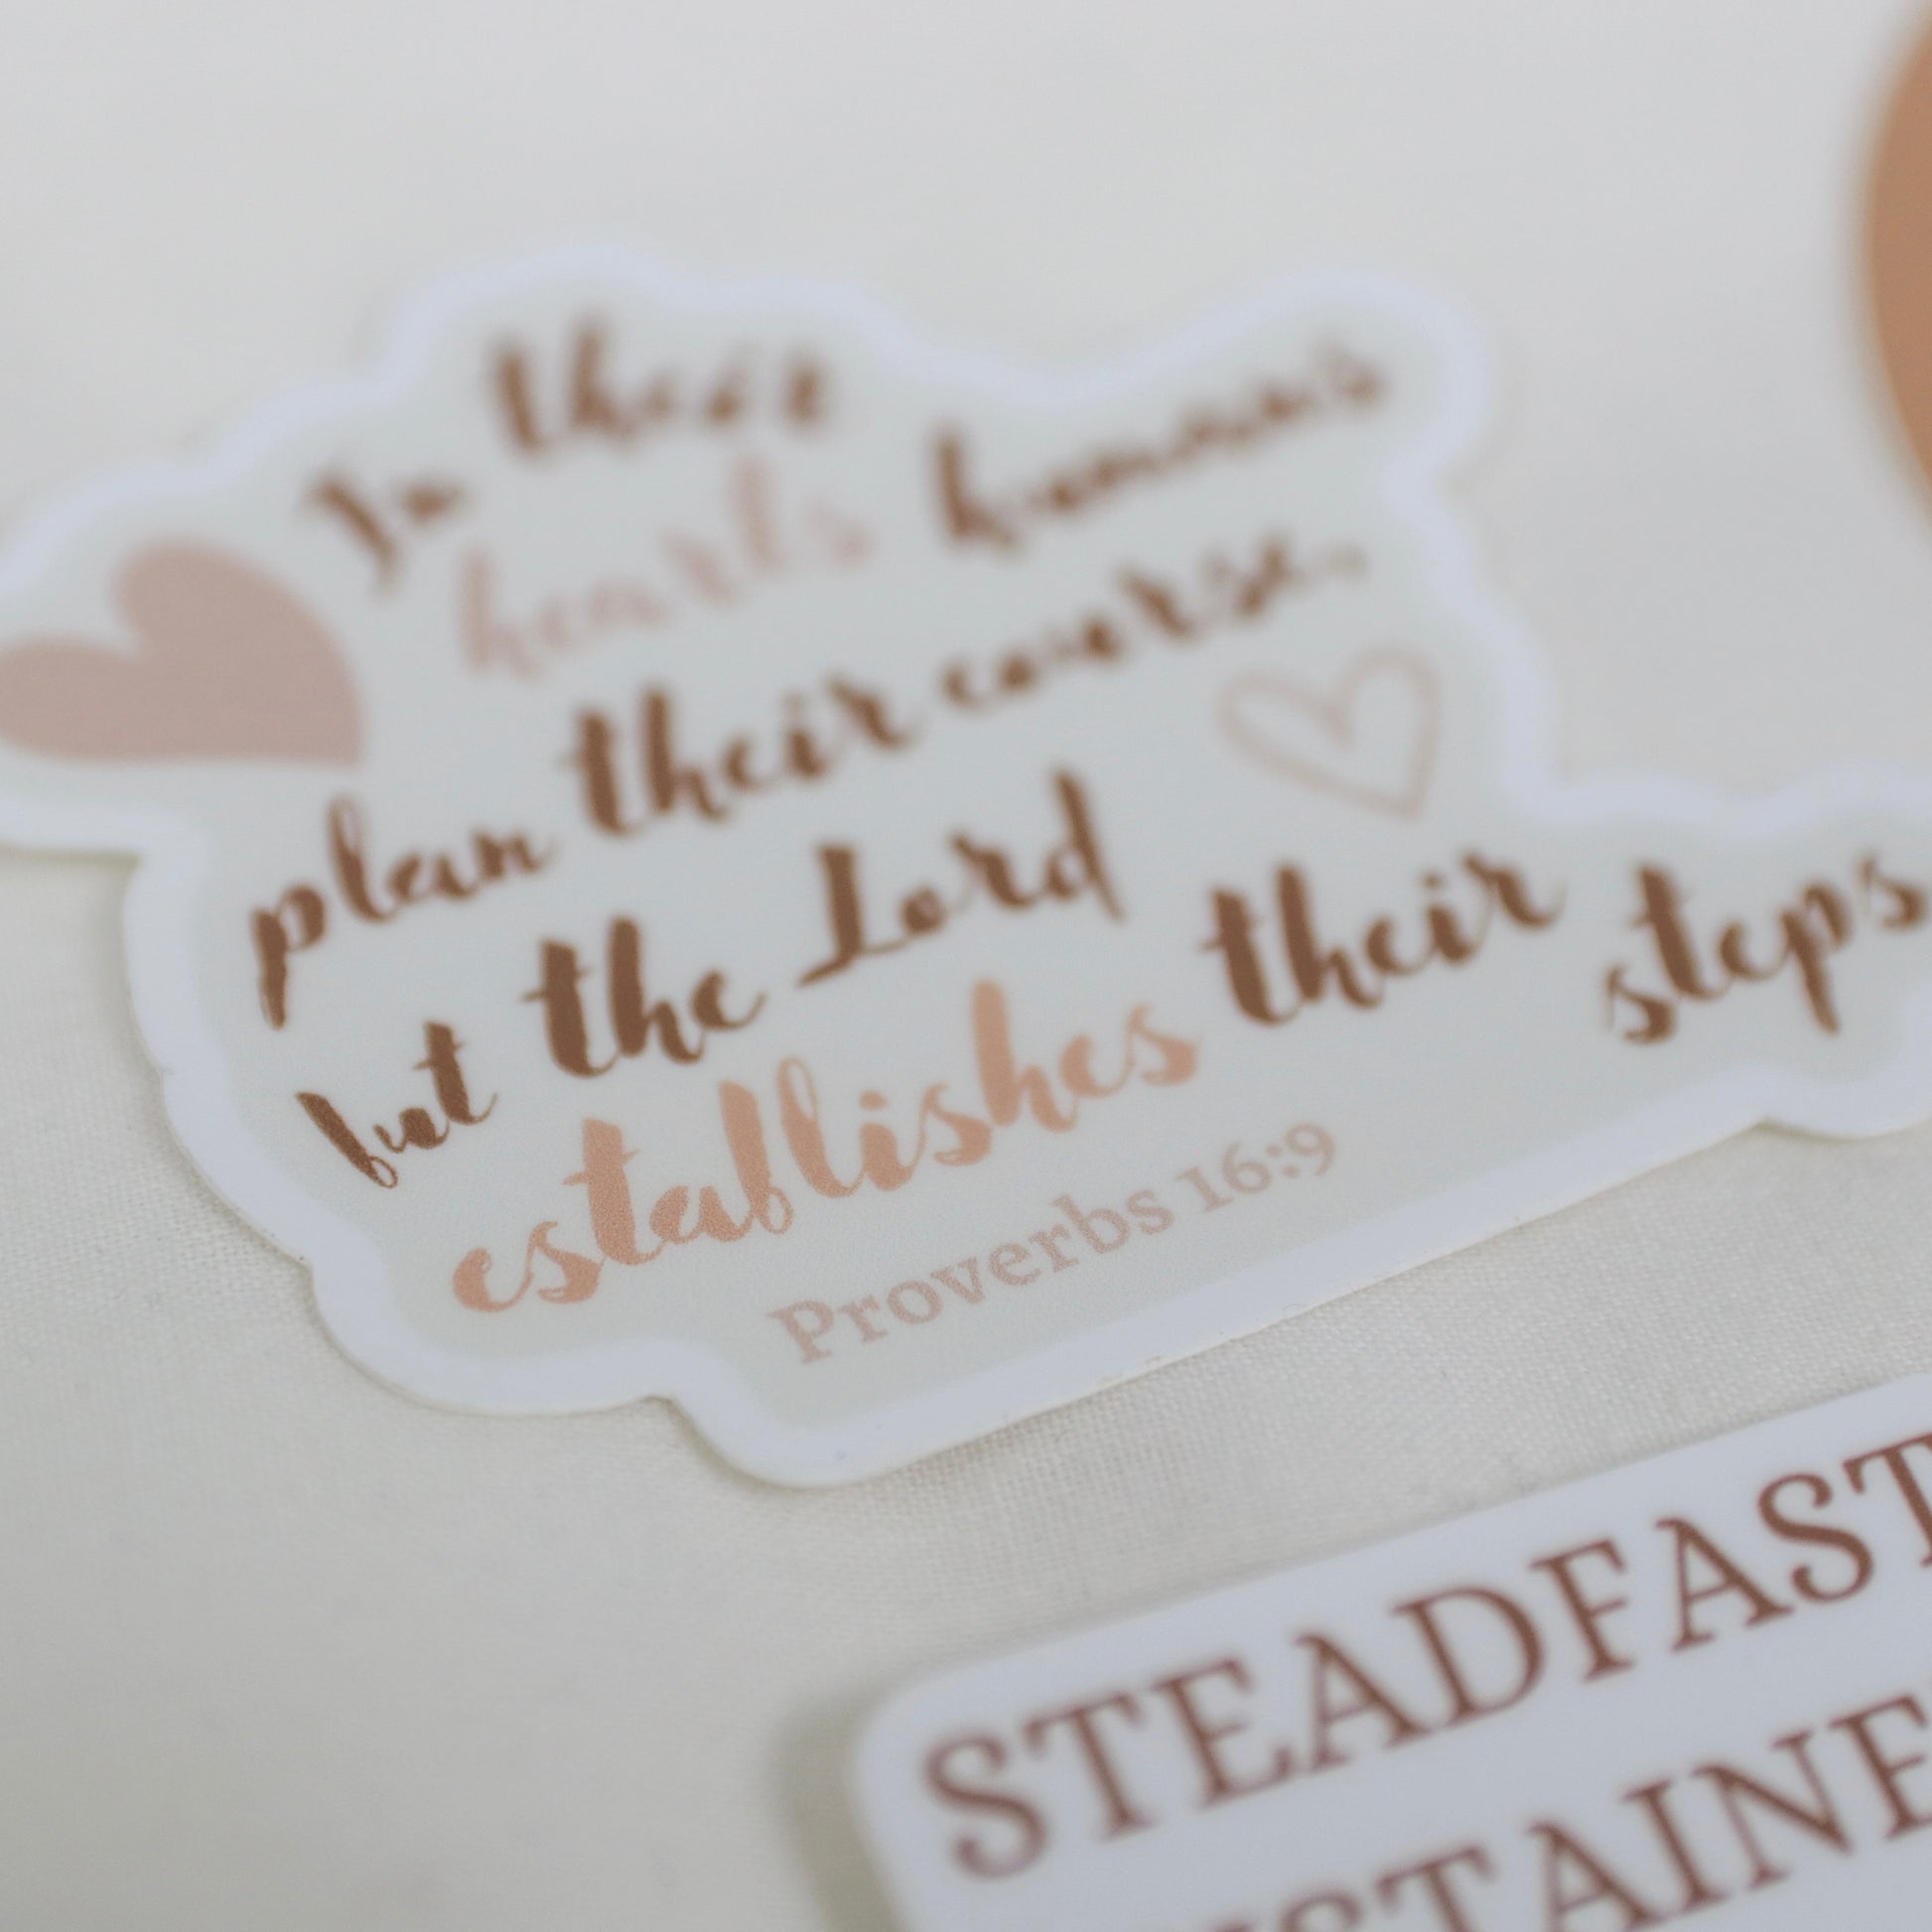 Proverbs 16:9 Sticker - Steadfast and Sustained